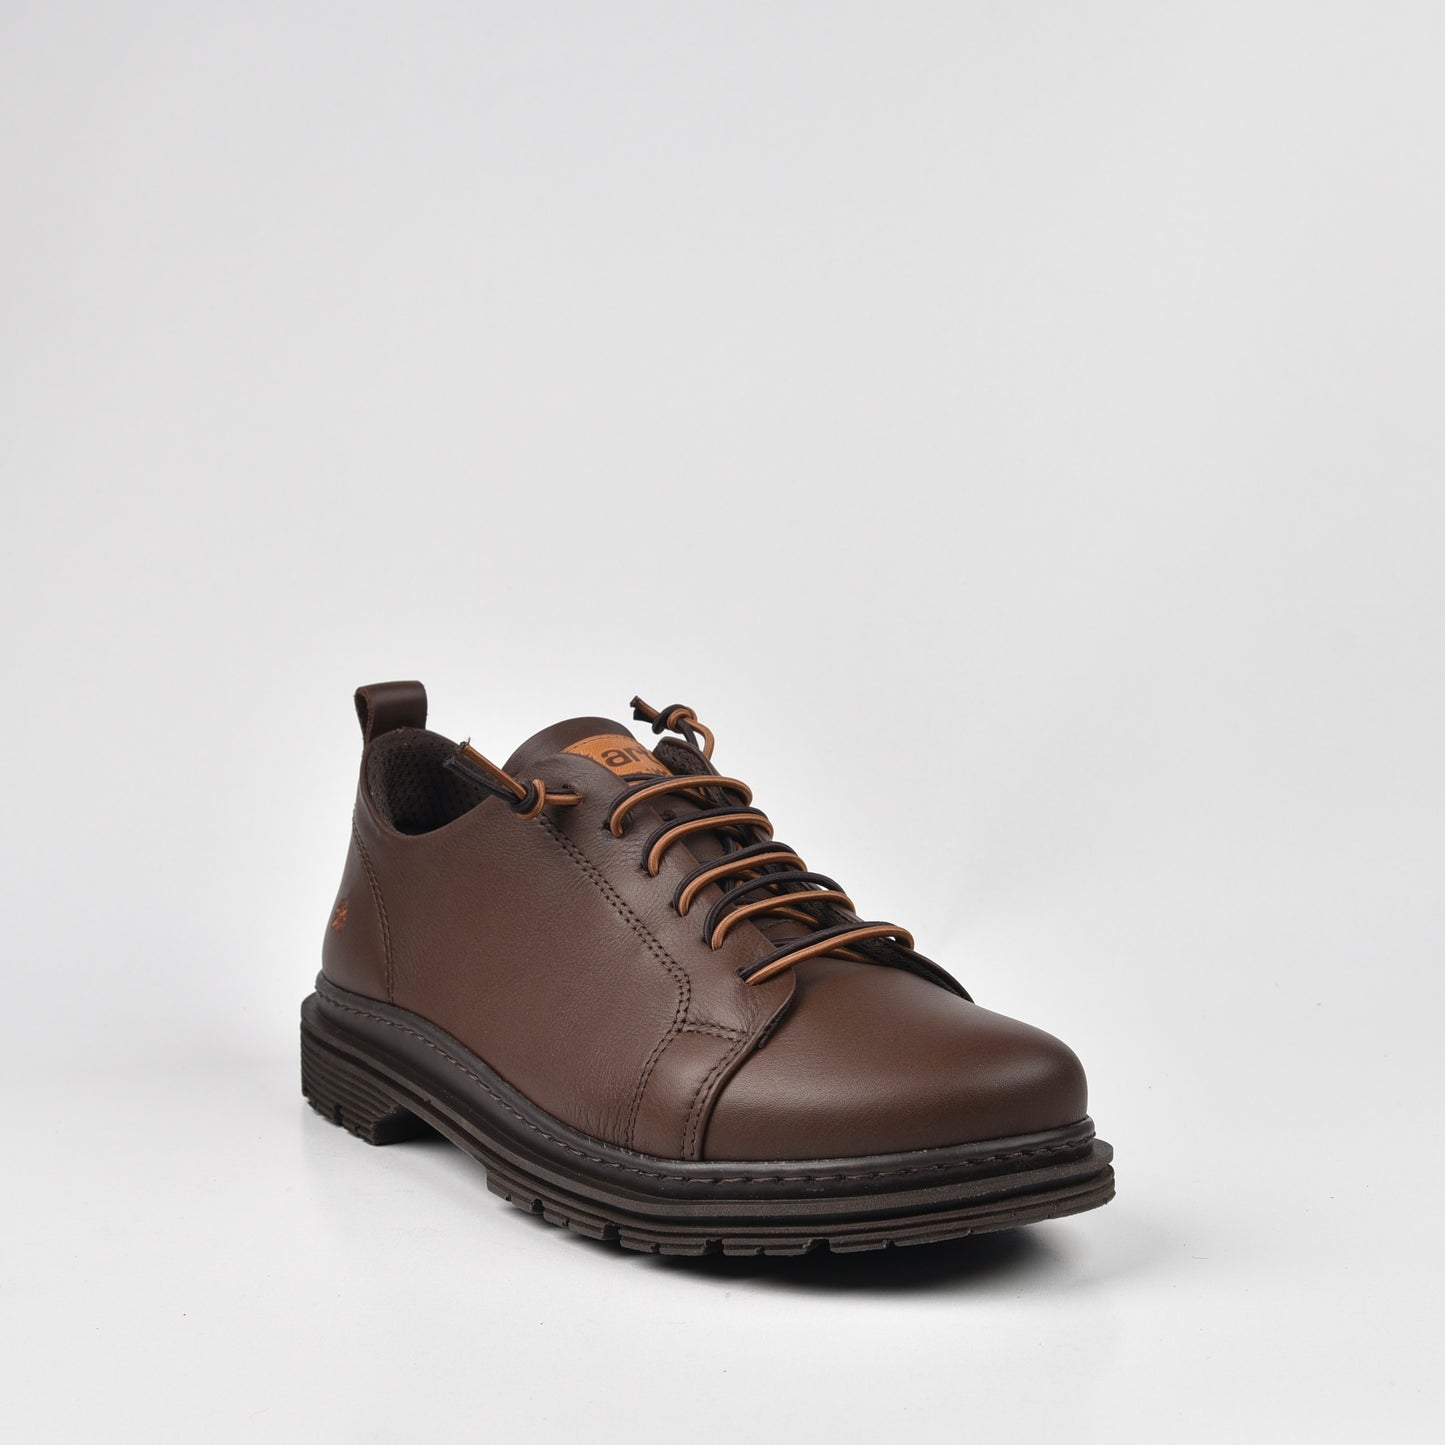 Art Spanish Loafers for Men in Napa Brown.